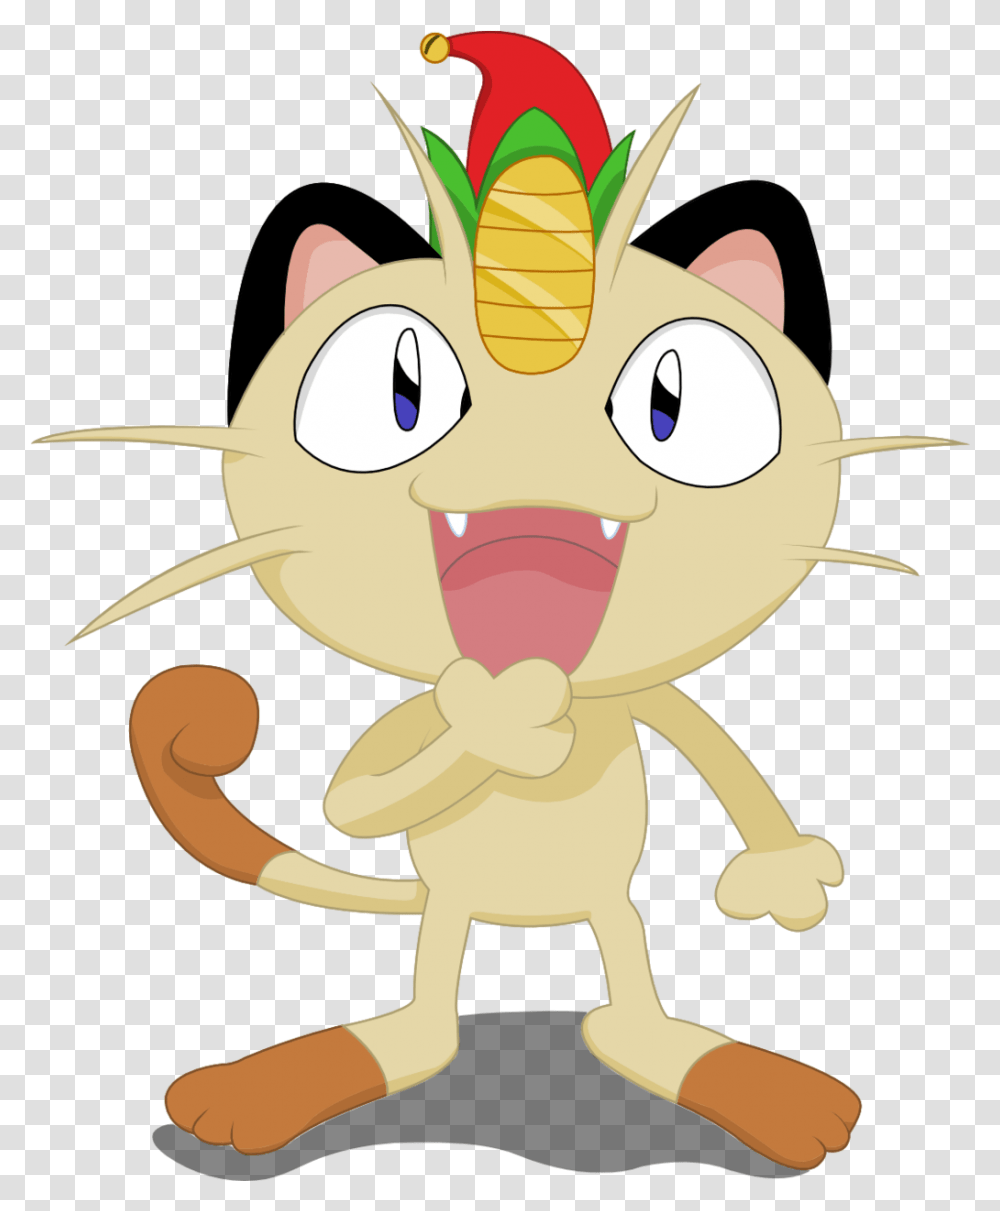 Download Meowth Christmas Full Size Image Pngkit Christmas Meowth, Toy, Animal, Graphics, Art Transparent Png